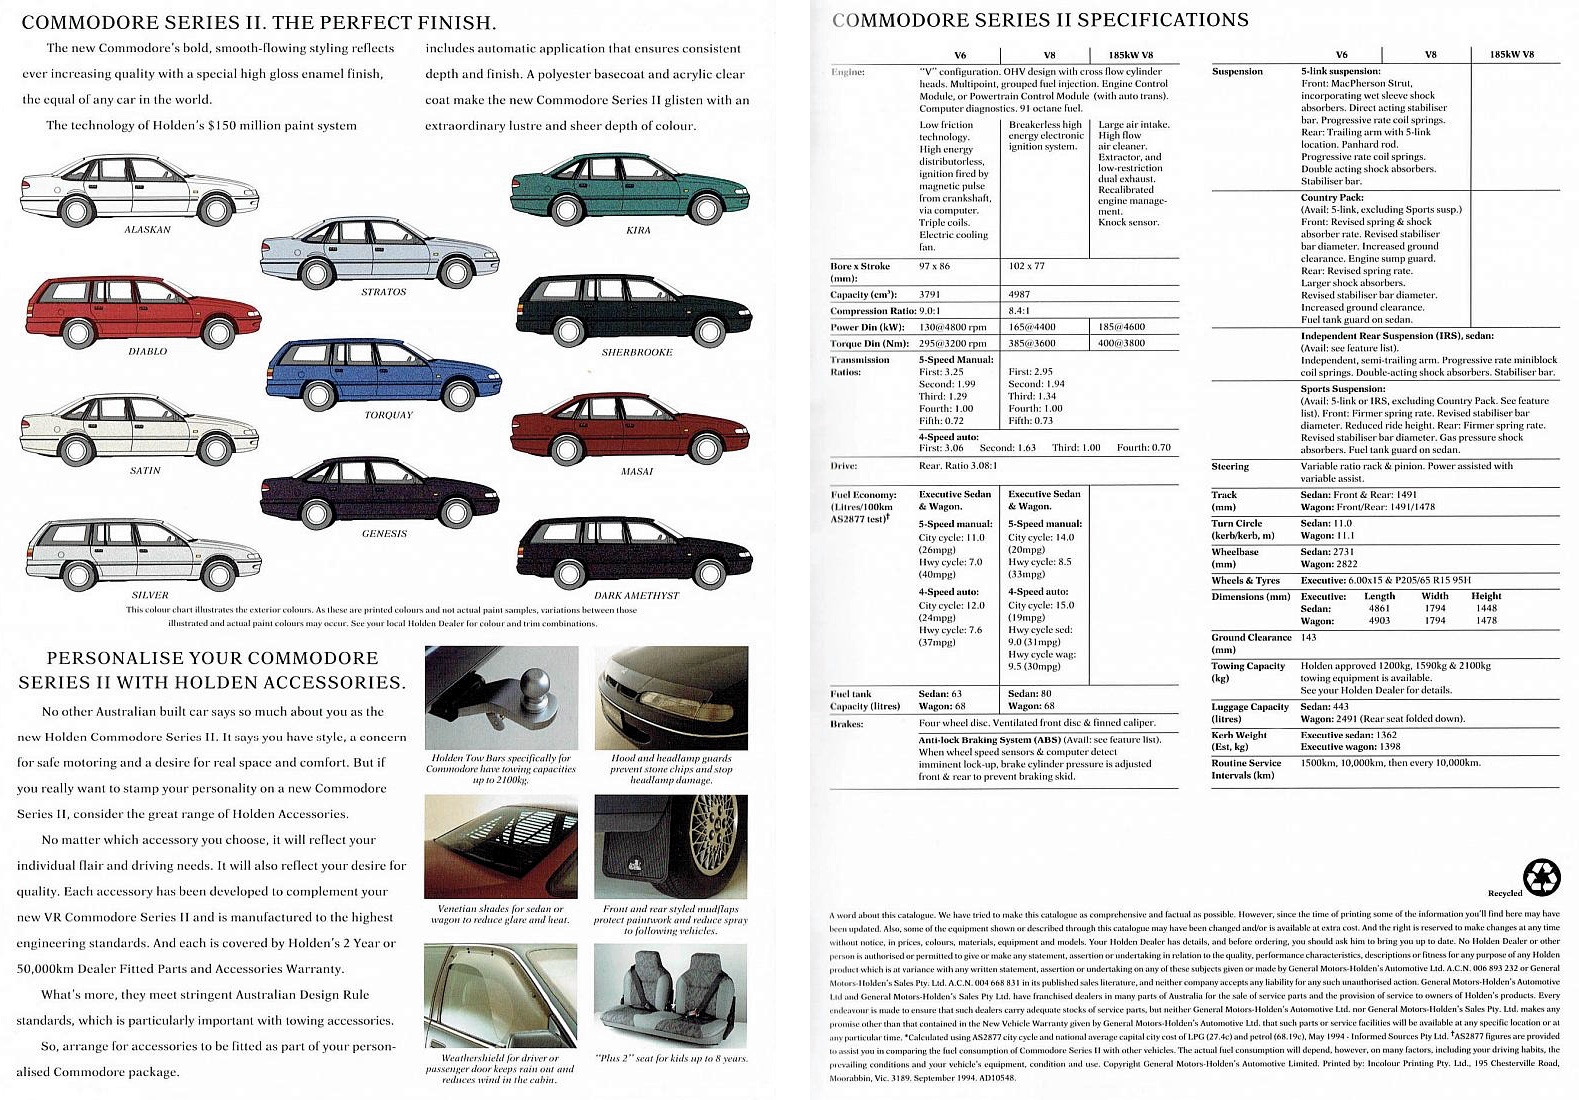 1994 Holden VR Commodore Brochure Page 4